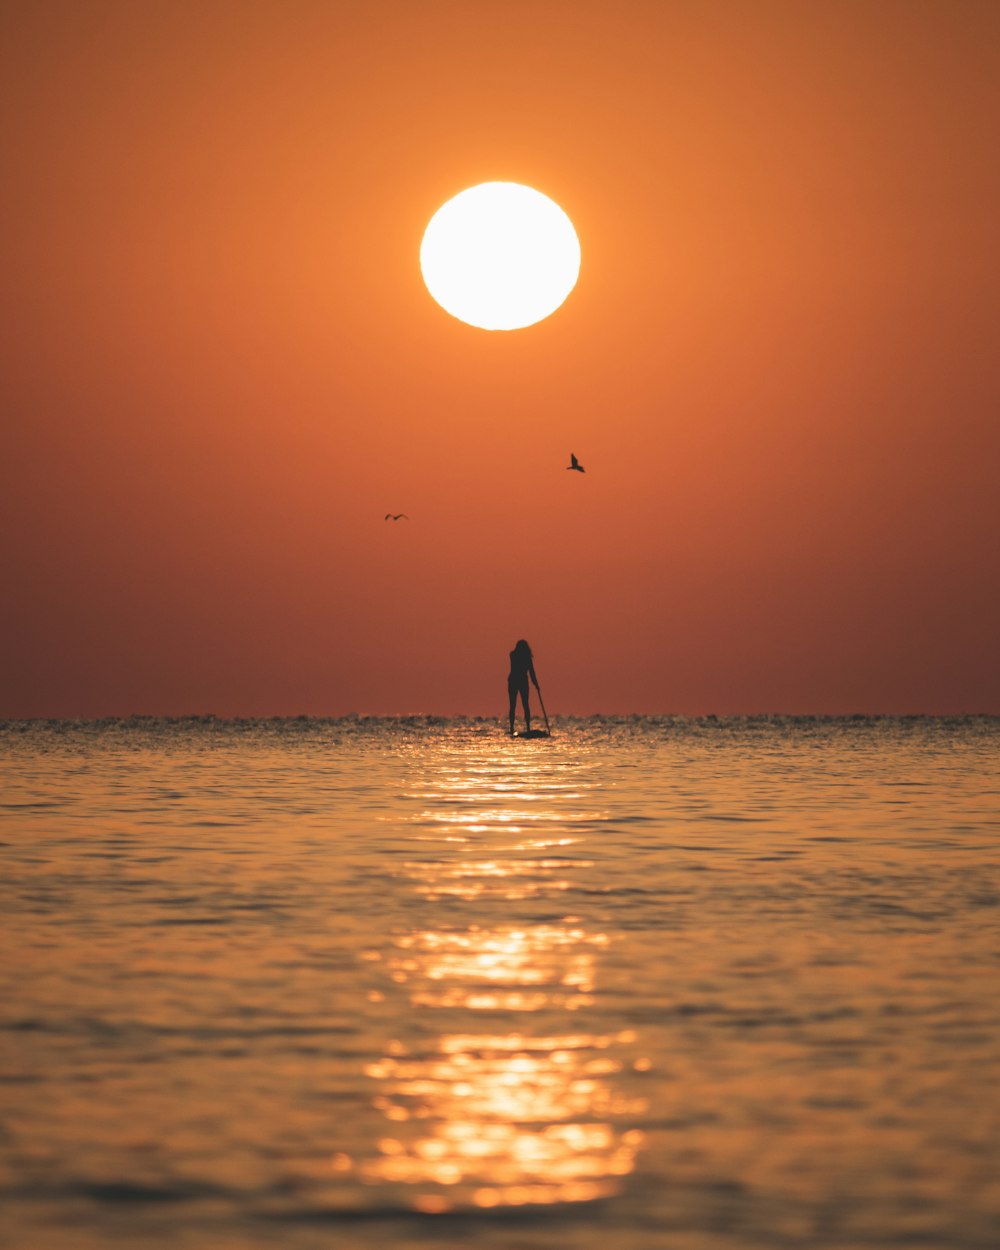 a person standing on a surfboard in the ocean at sunset